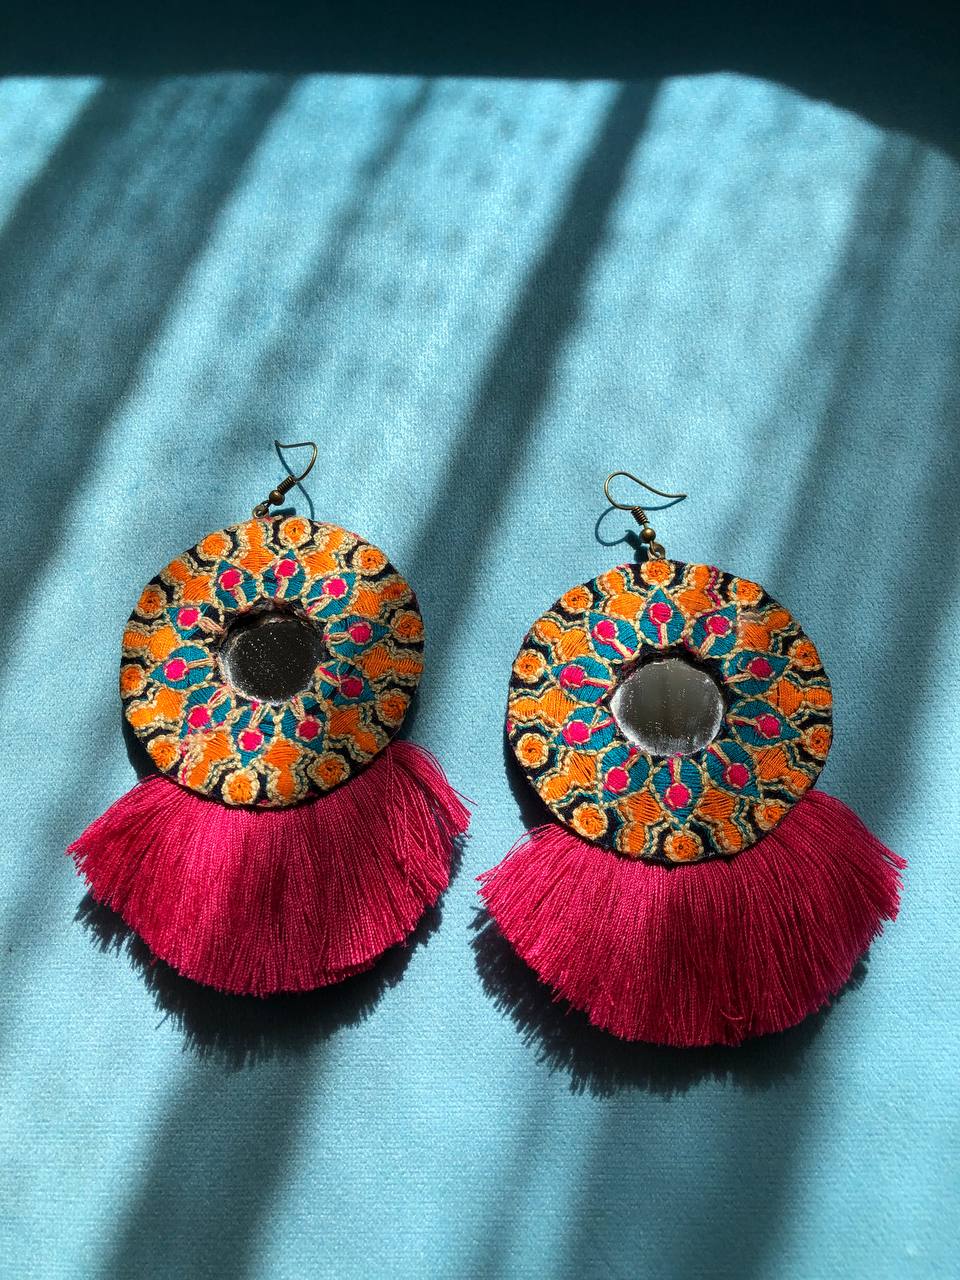 Handmade Embroidered Earrings With Natural Thread